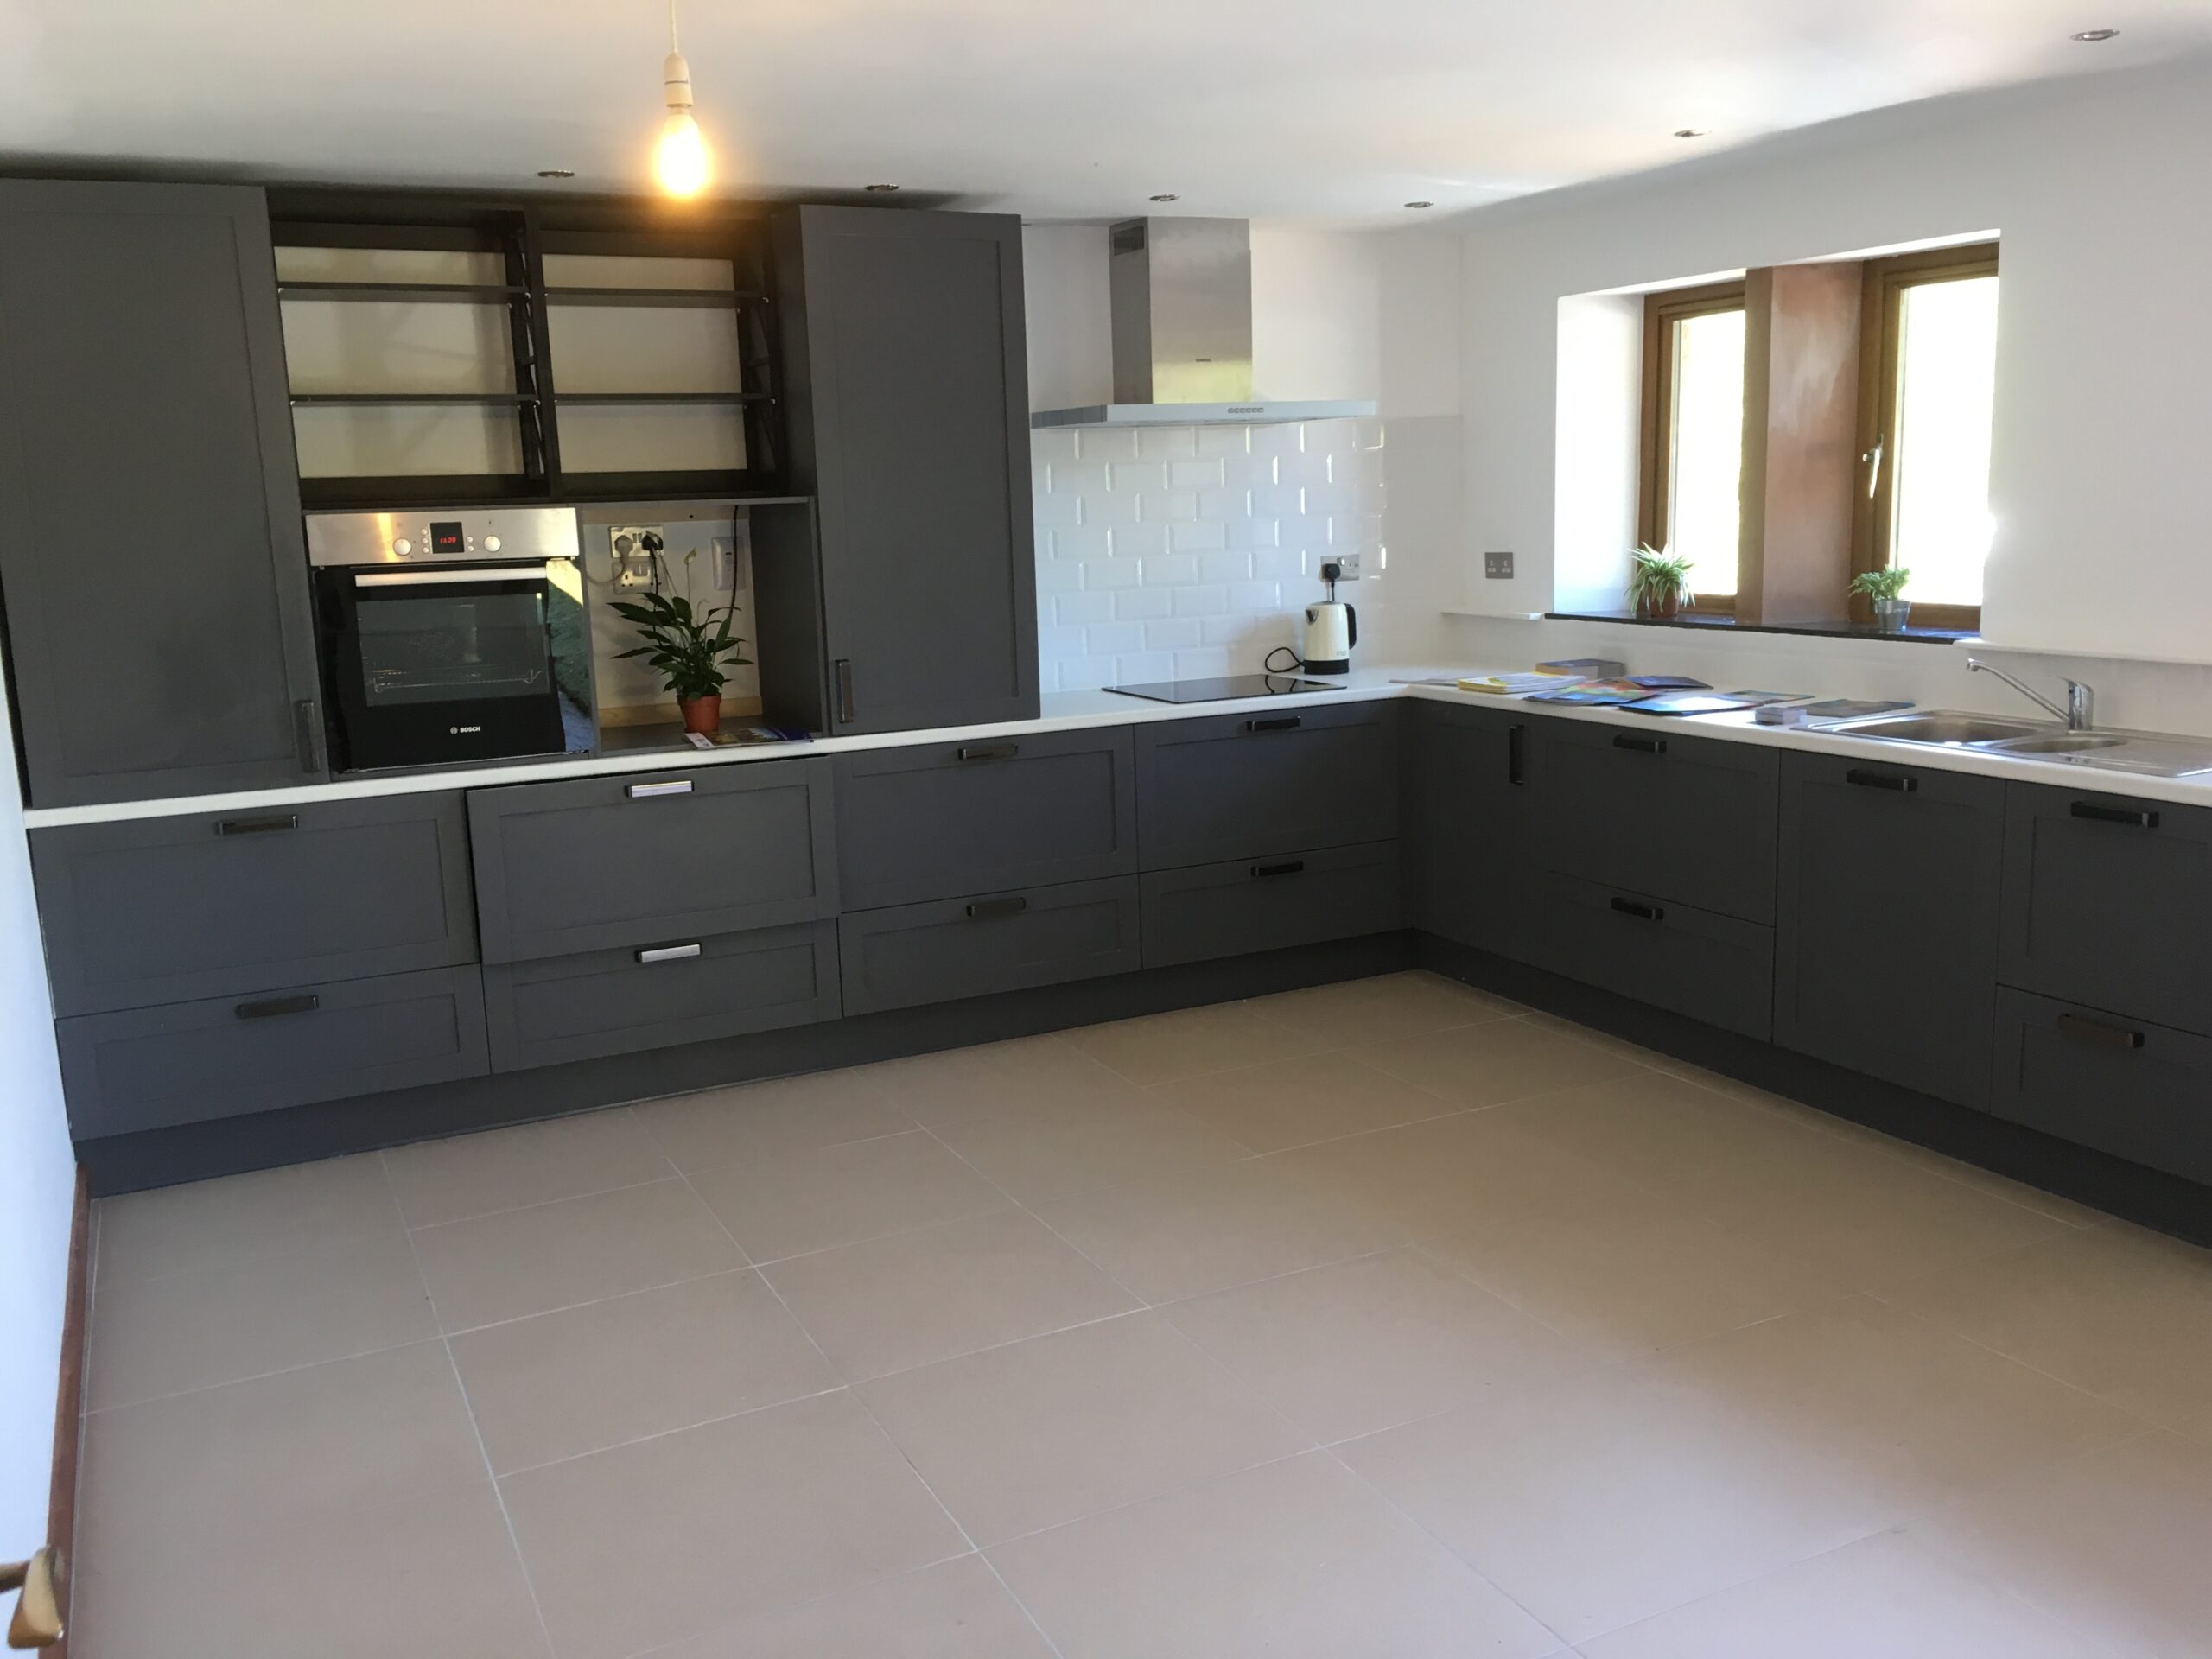 Kitchen made with flood resilient materials with raised oven, fridge and freezer.